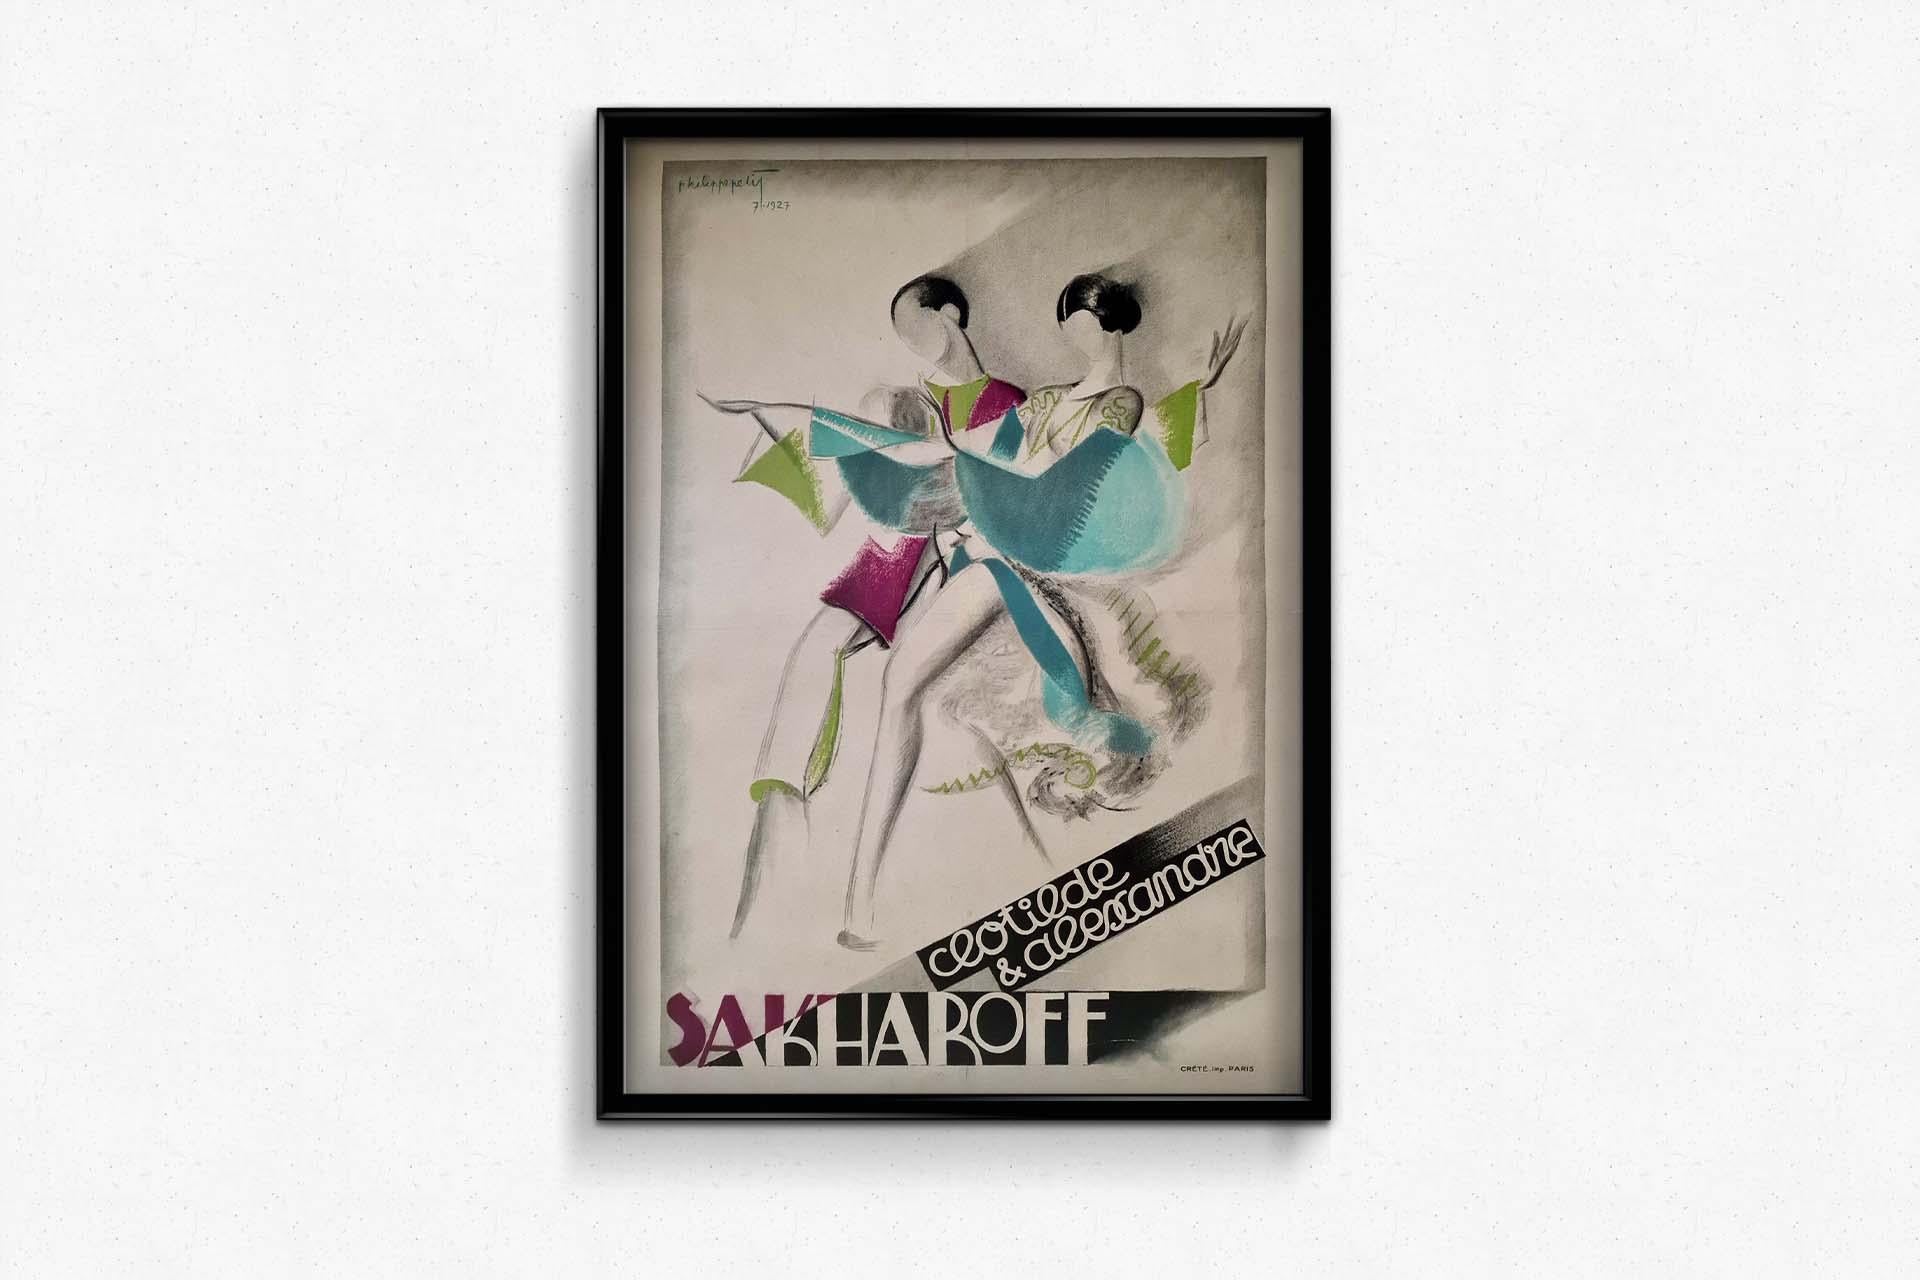 Philippe Petit's 1927 Art Deco poster for Clotilde & Alexandre Sakharoff is a mesmerizing piece of visual art that captures the essence of an era known for its opulence and artistic innovation. This poster not only embodies the spirit of Art Deco